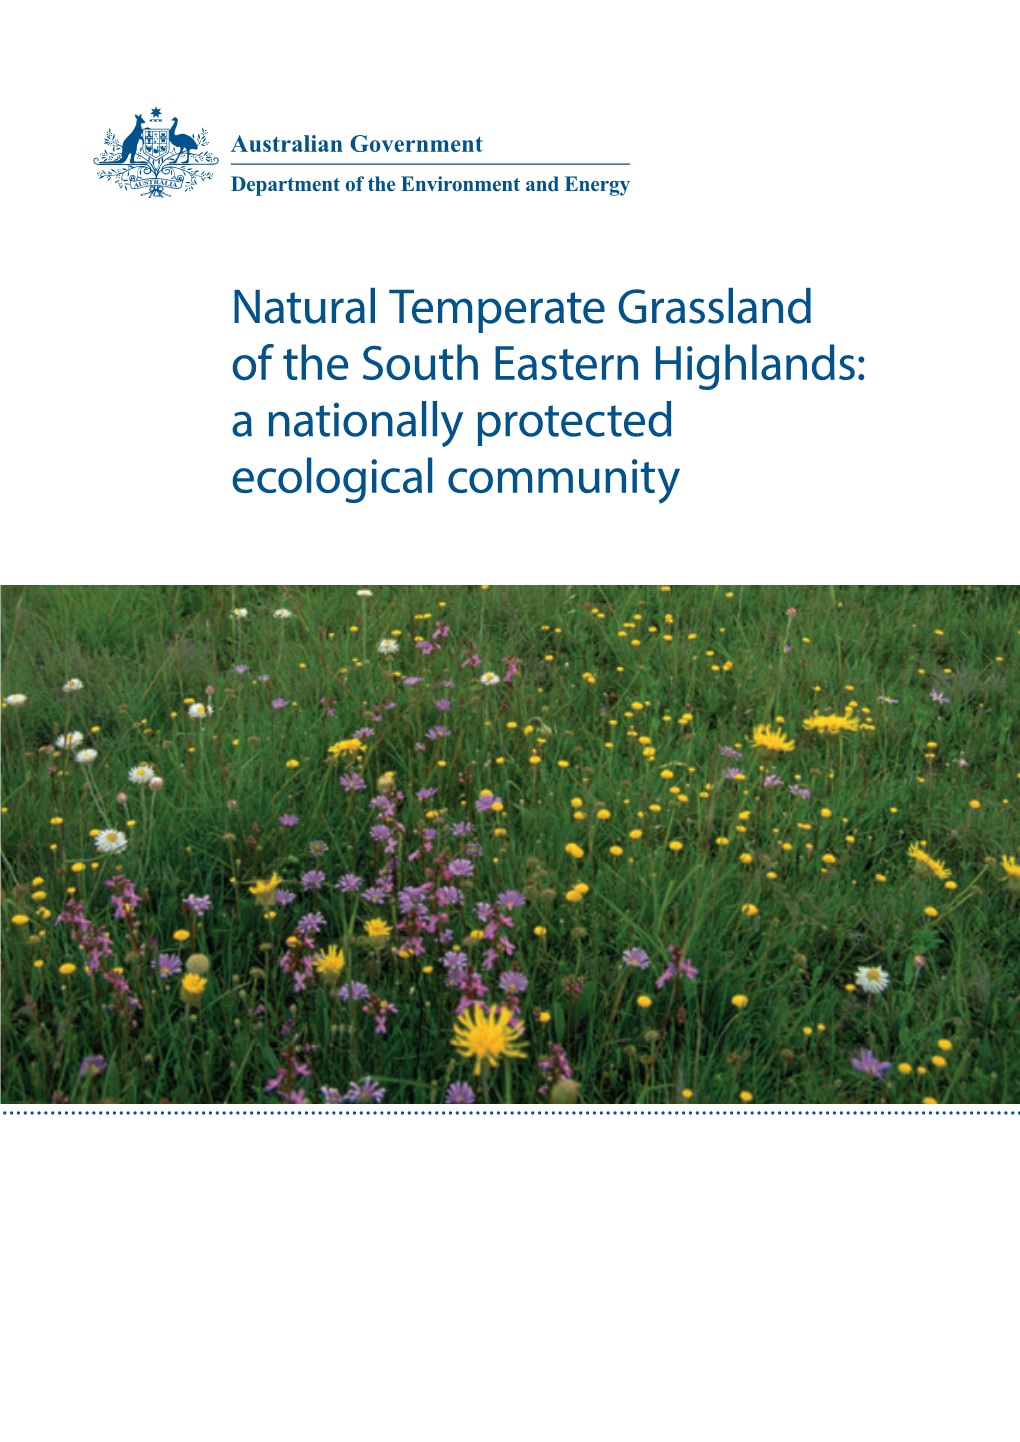 Natural Temperate Grassland of the South Eastern Highlands